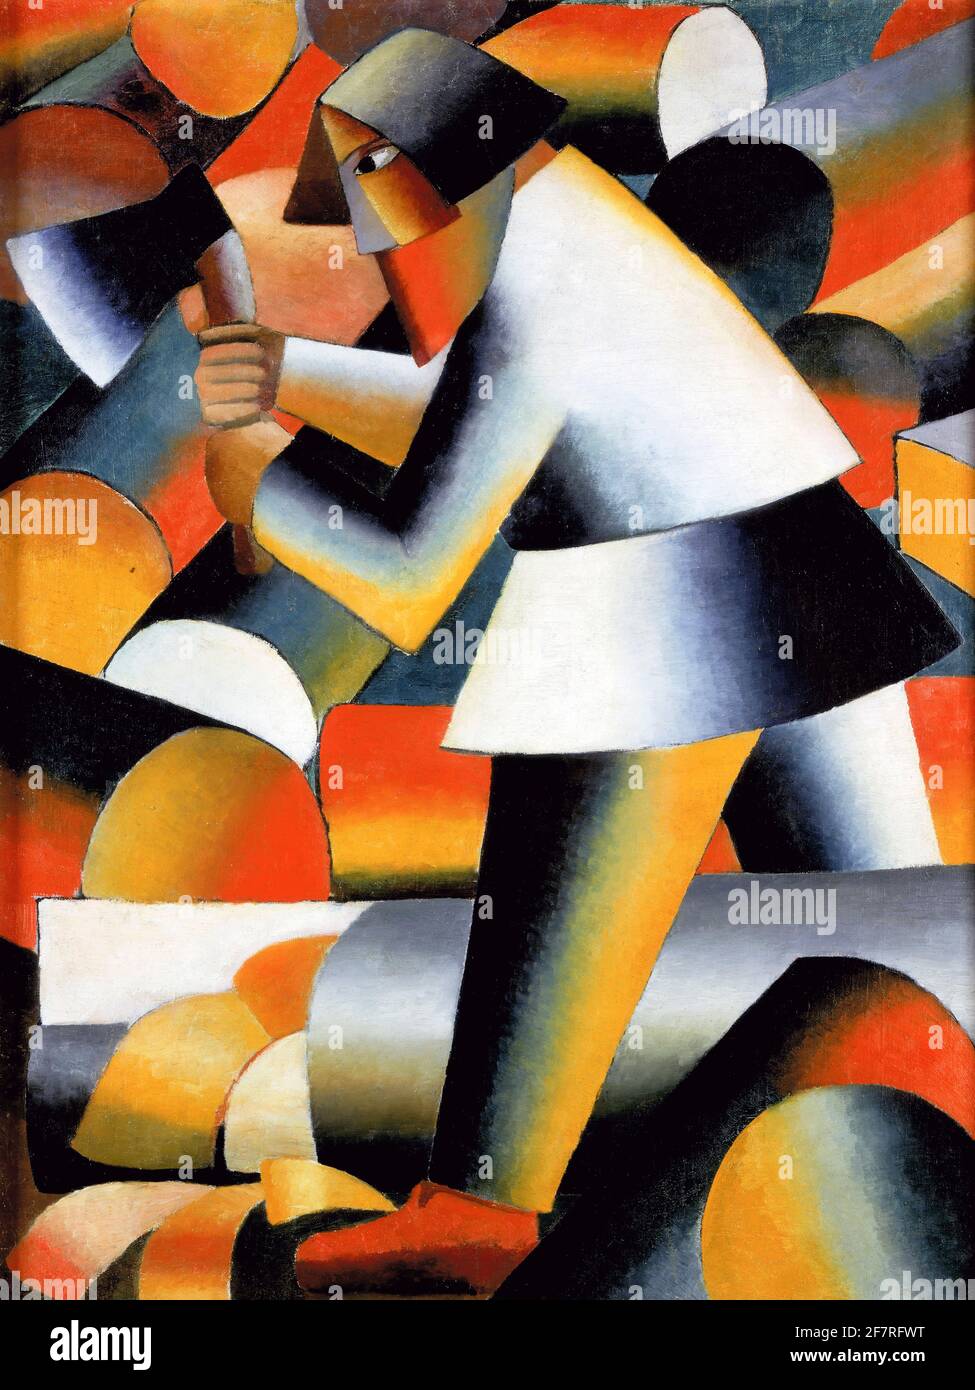 Kazimir Malevich. Painting entitled 'The Woodcutter' by the Russian avant-garde artist, Kazimir Severinovich Malevich (1879-1935),  oil on canvas, 1912 Stock Photo